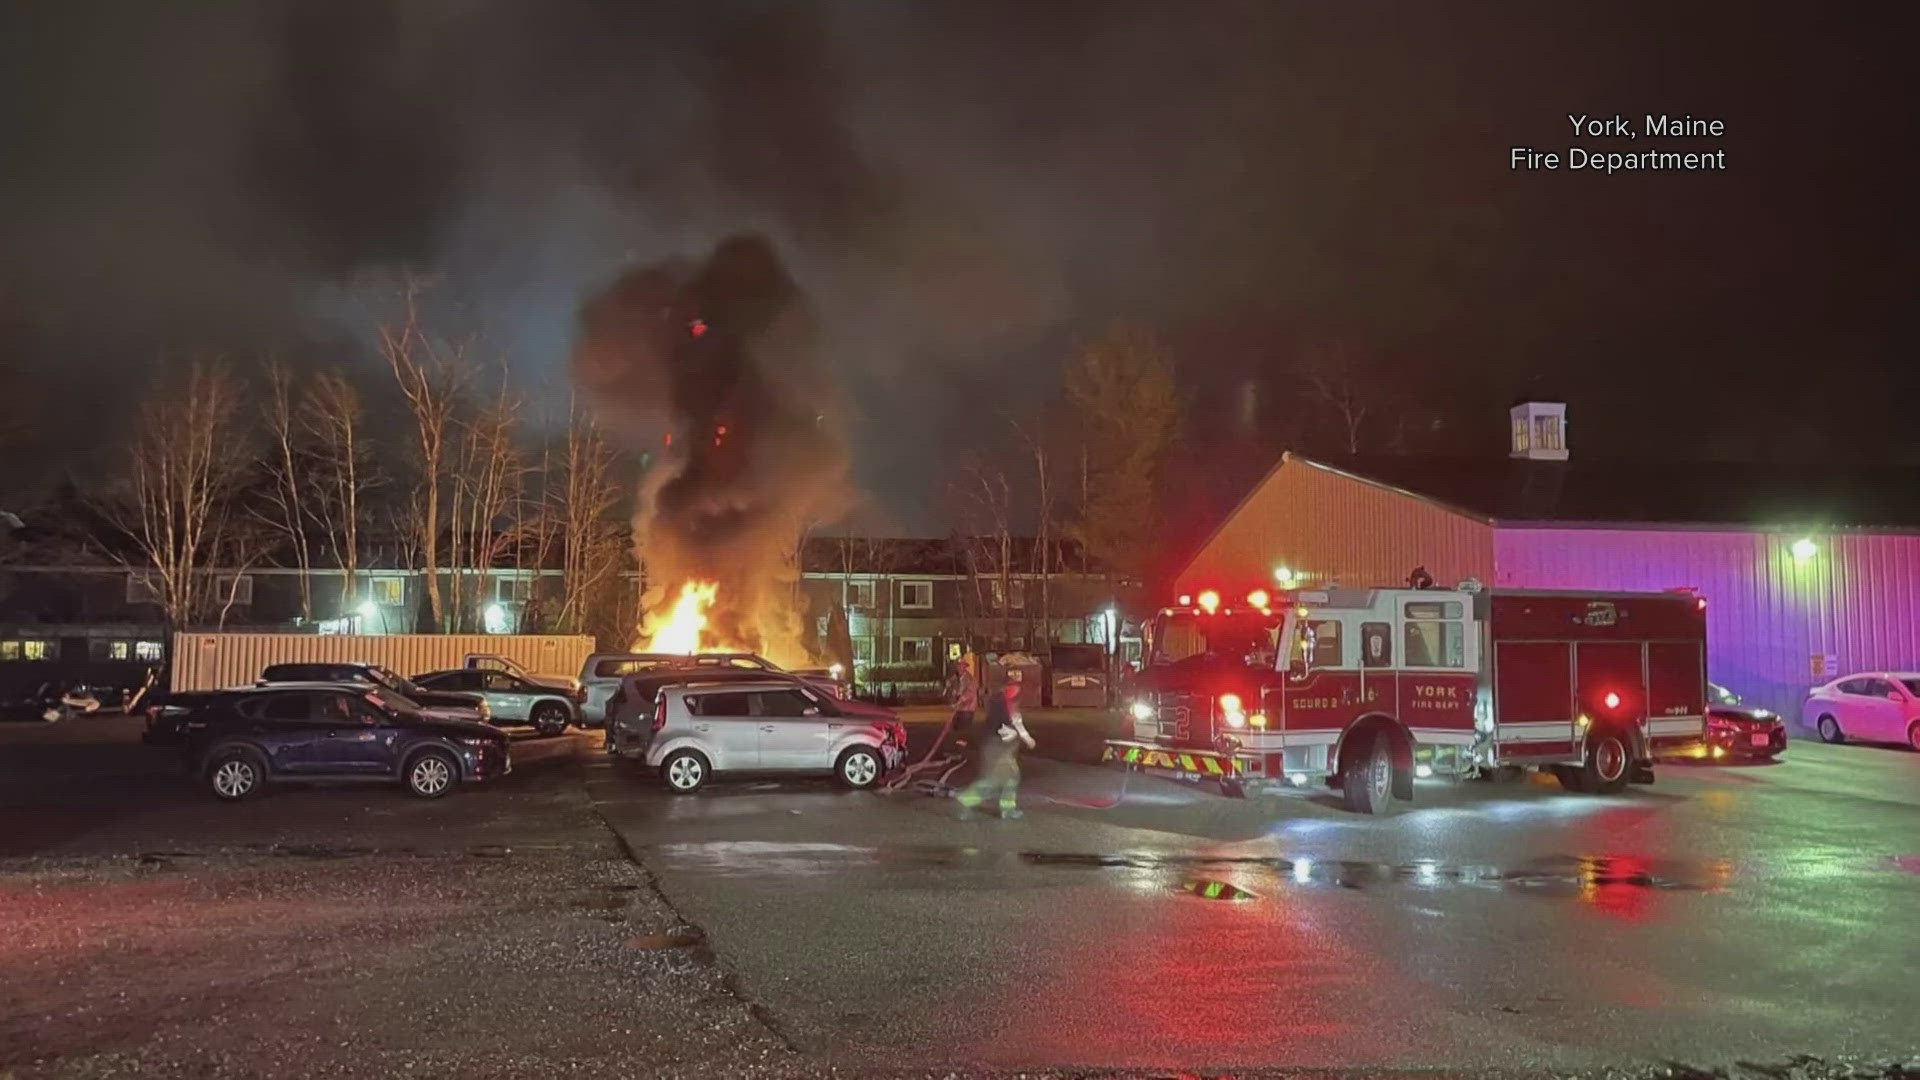 The fire at the autobody shop happened just after 4 a.m. Monday.